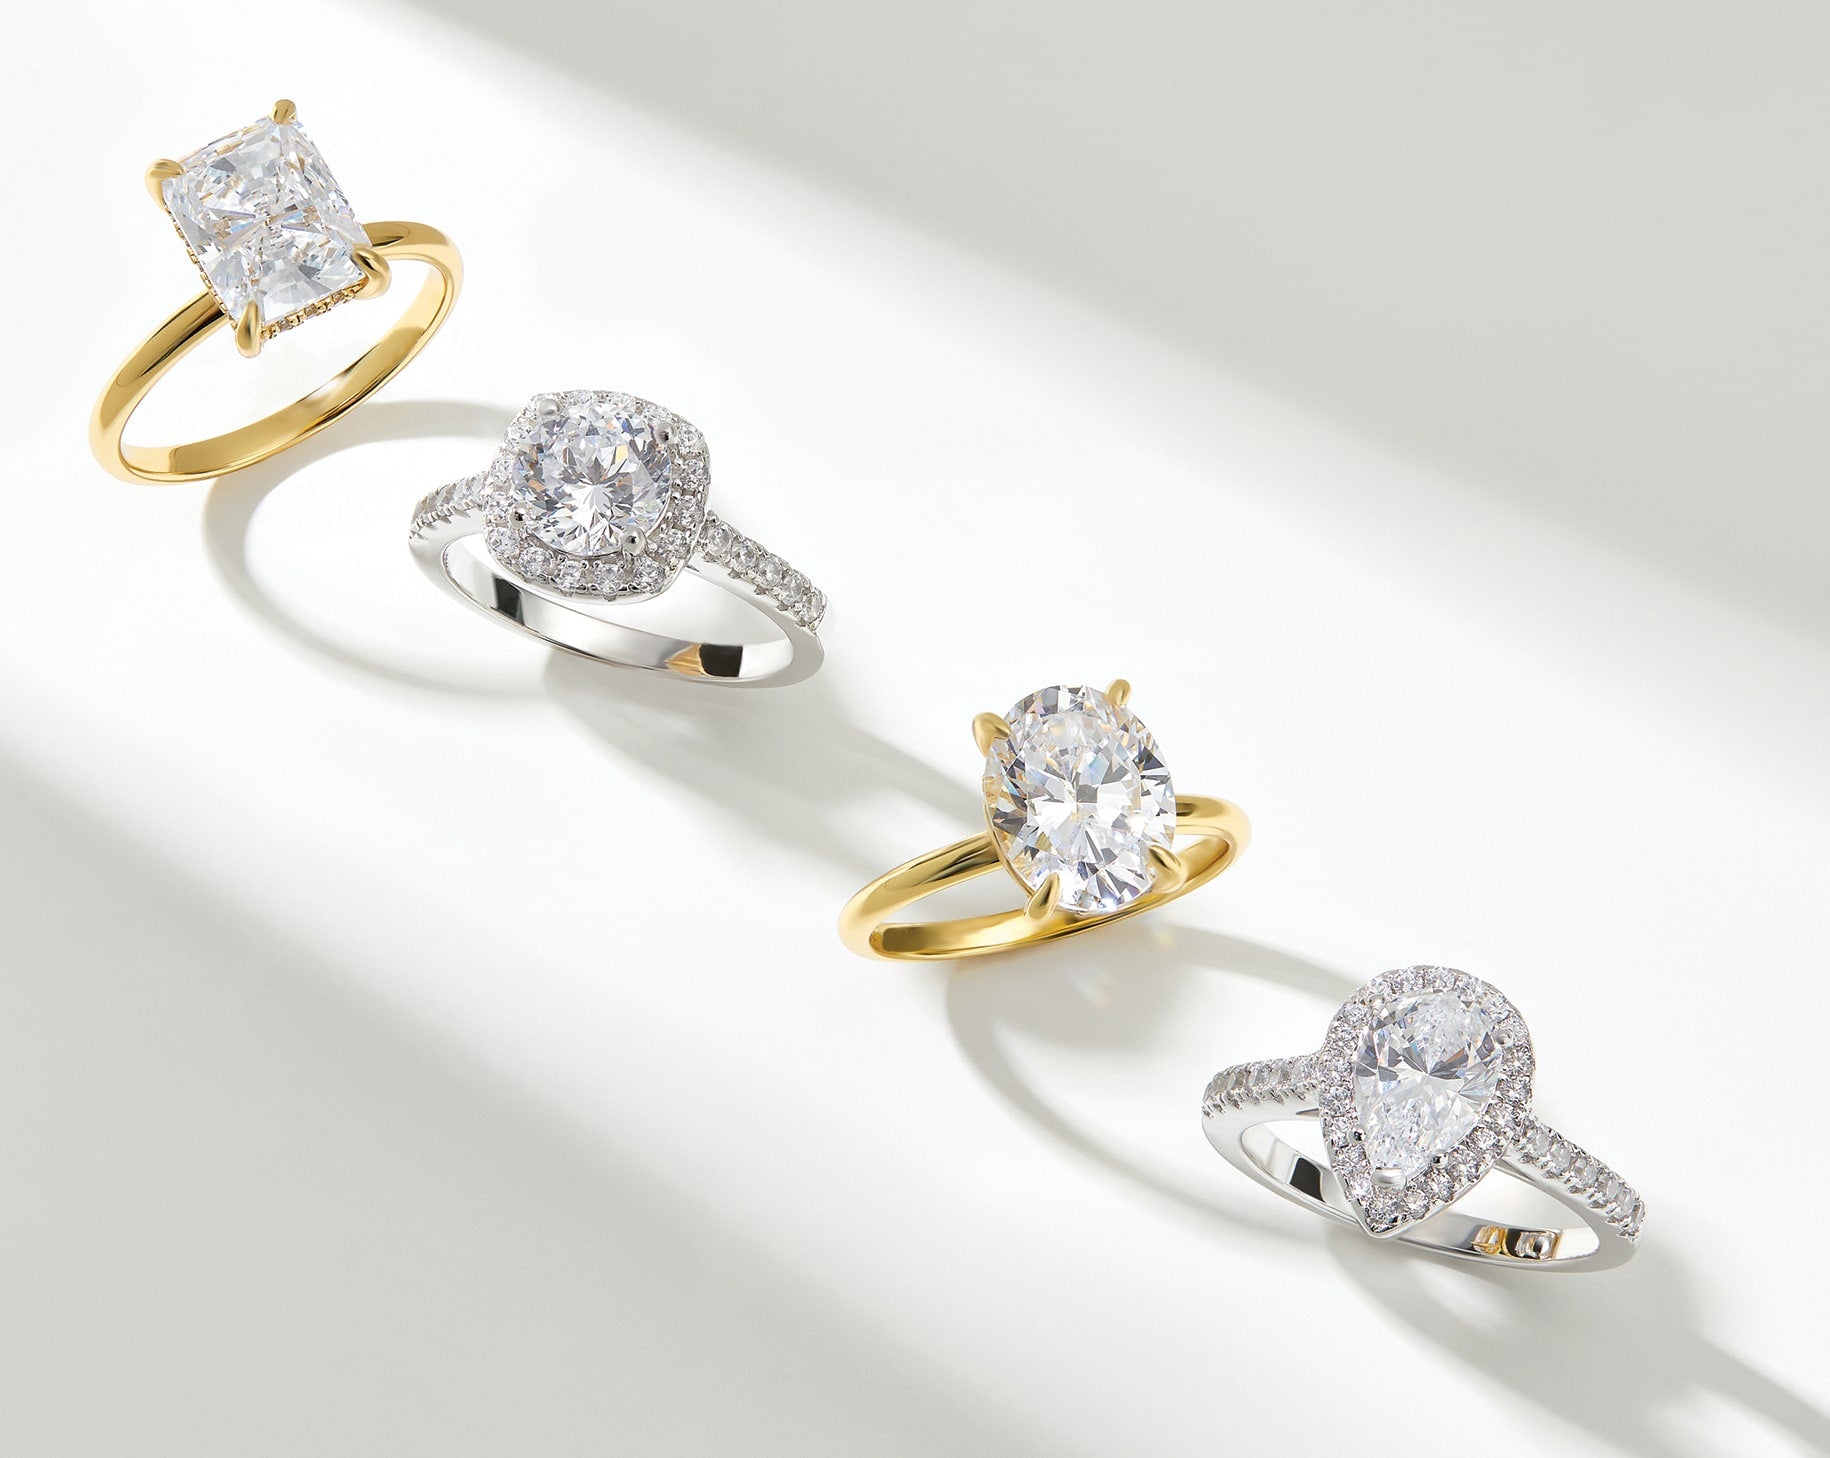 4 engagement rings in gold and silver in a row